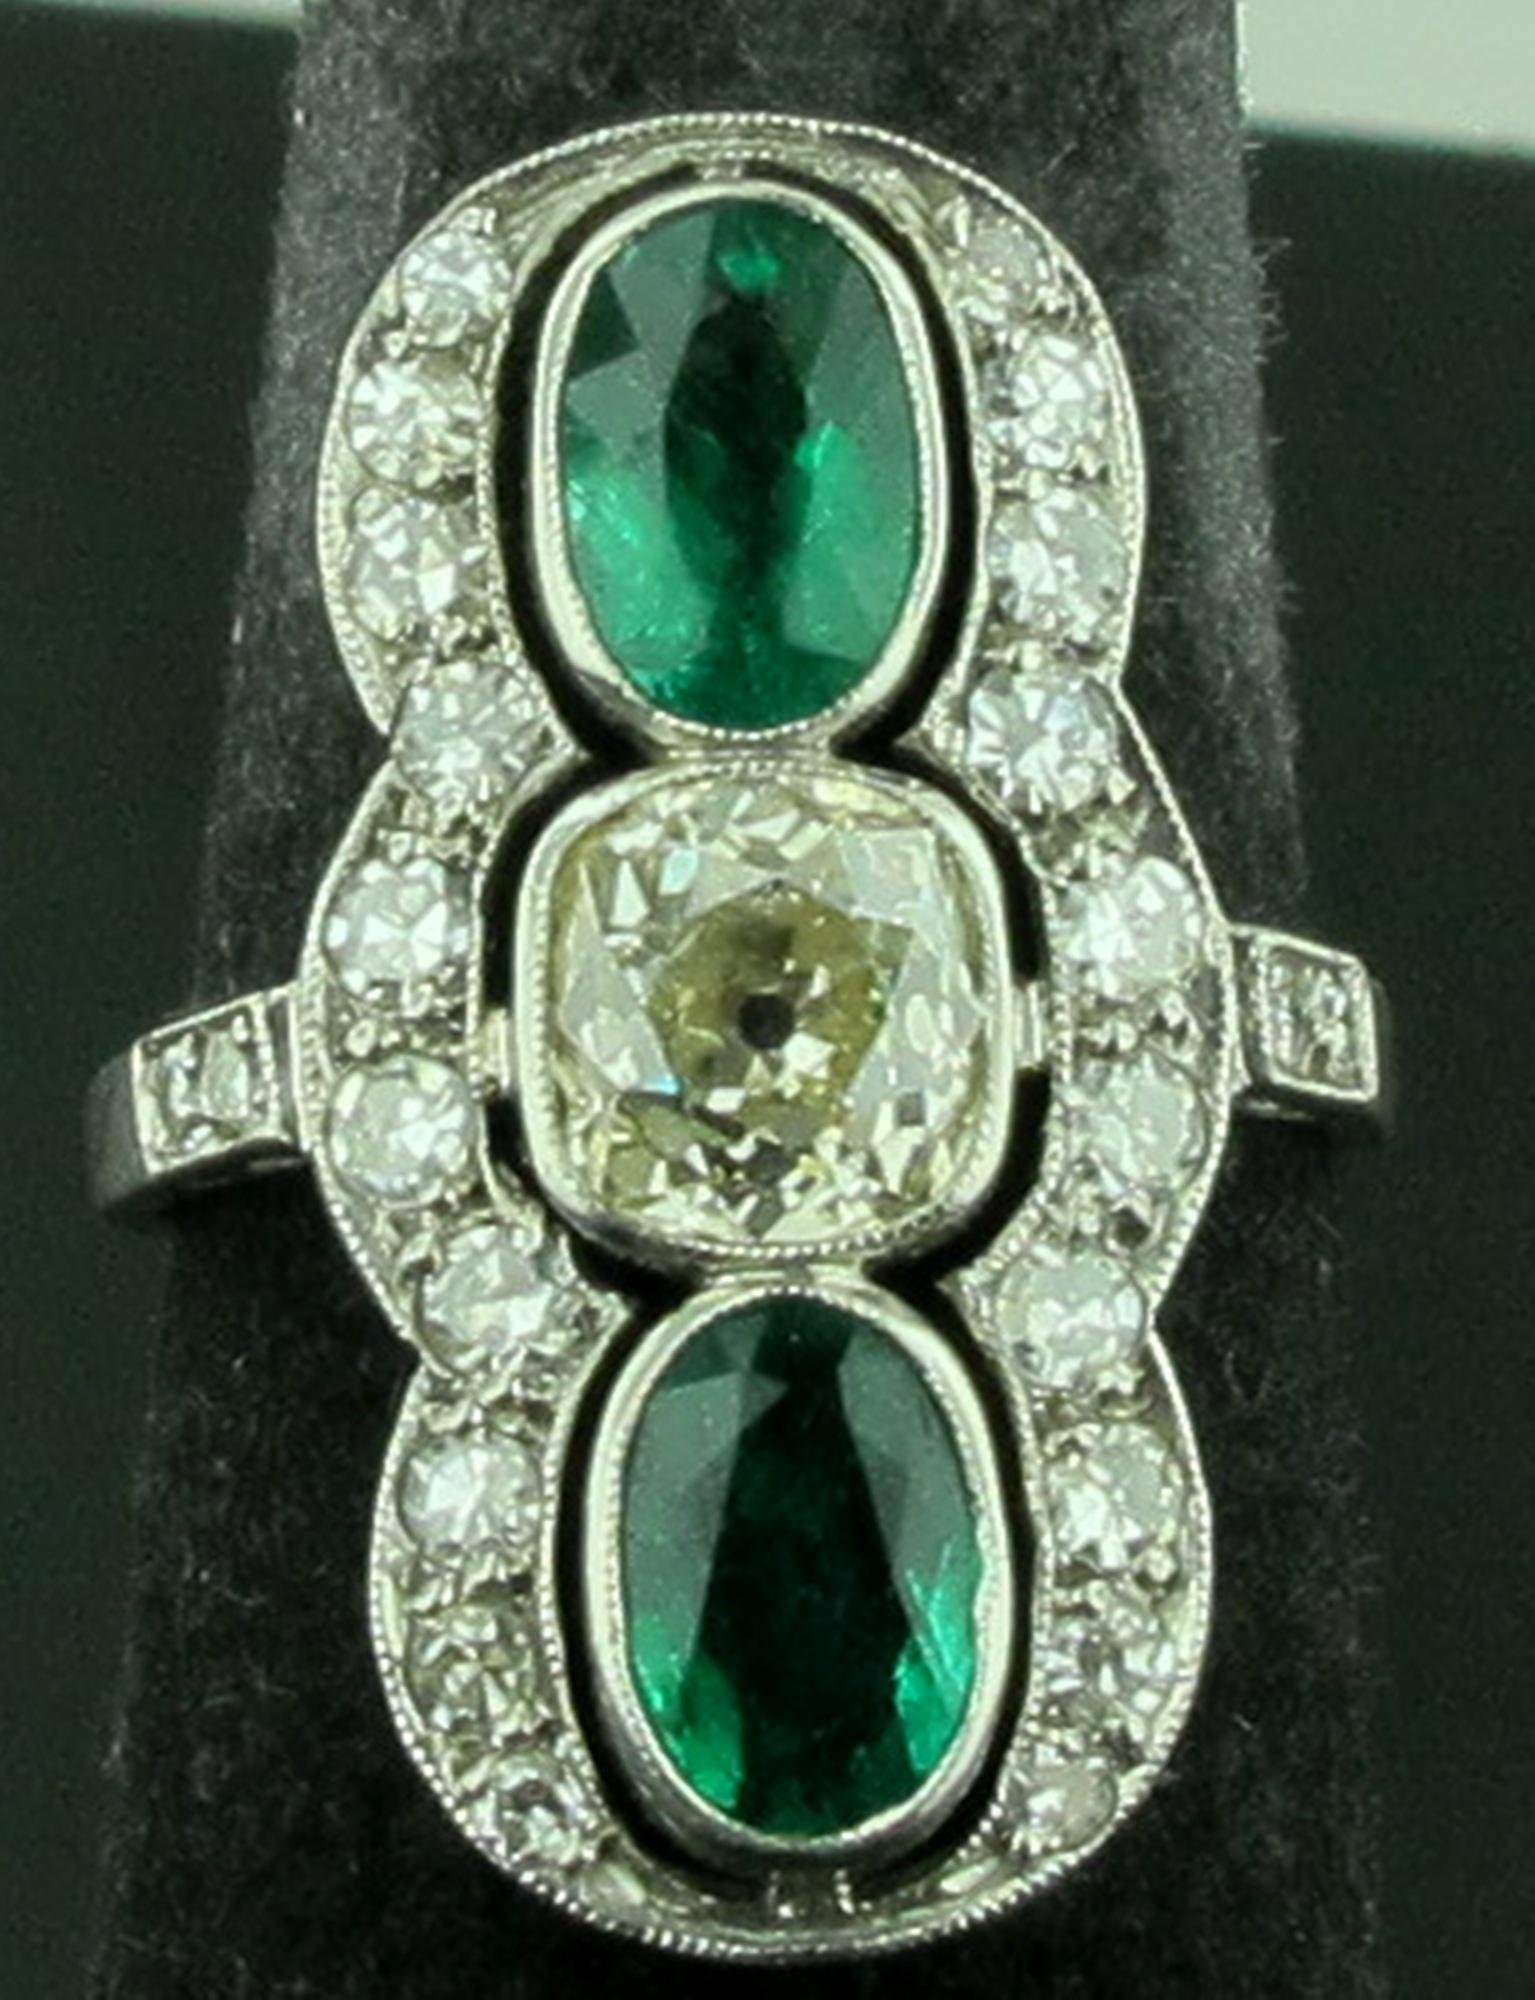 Circa 1910 Vintage Emerald and diamond ring set in Platinum. Ring features two oval shaped Emeralds with a carat weight of approximately 1 carat each, for a total of 2 carats.  The Center Old Mine Cut Diamond has a weight of 1.40 carats, K-L color,